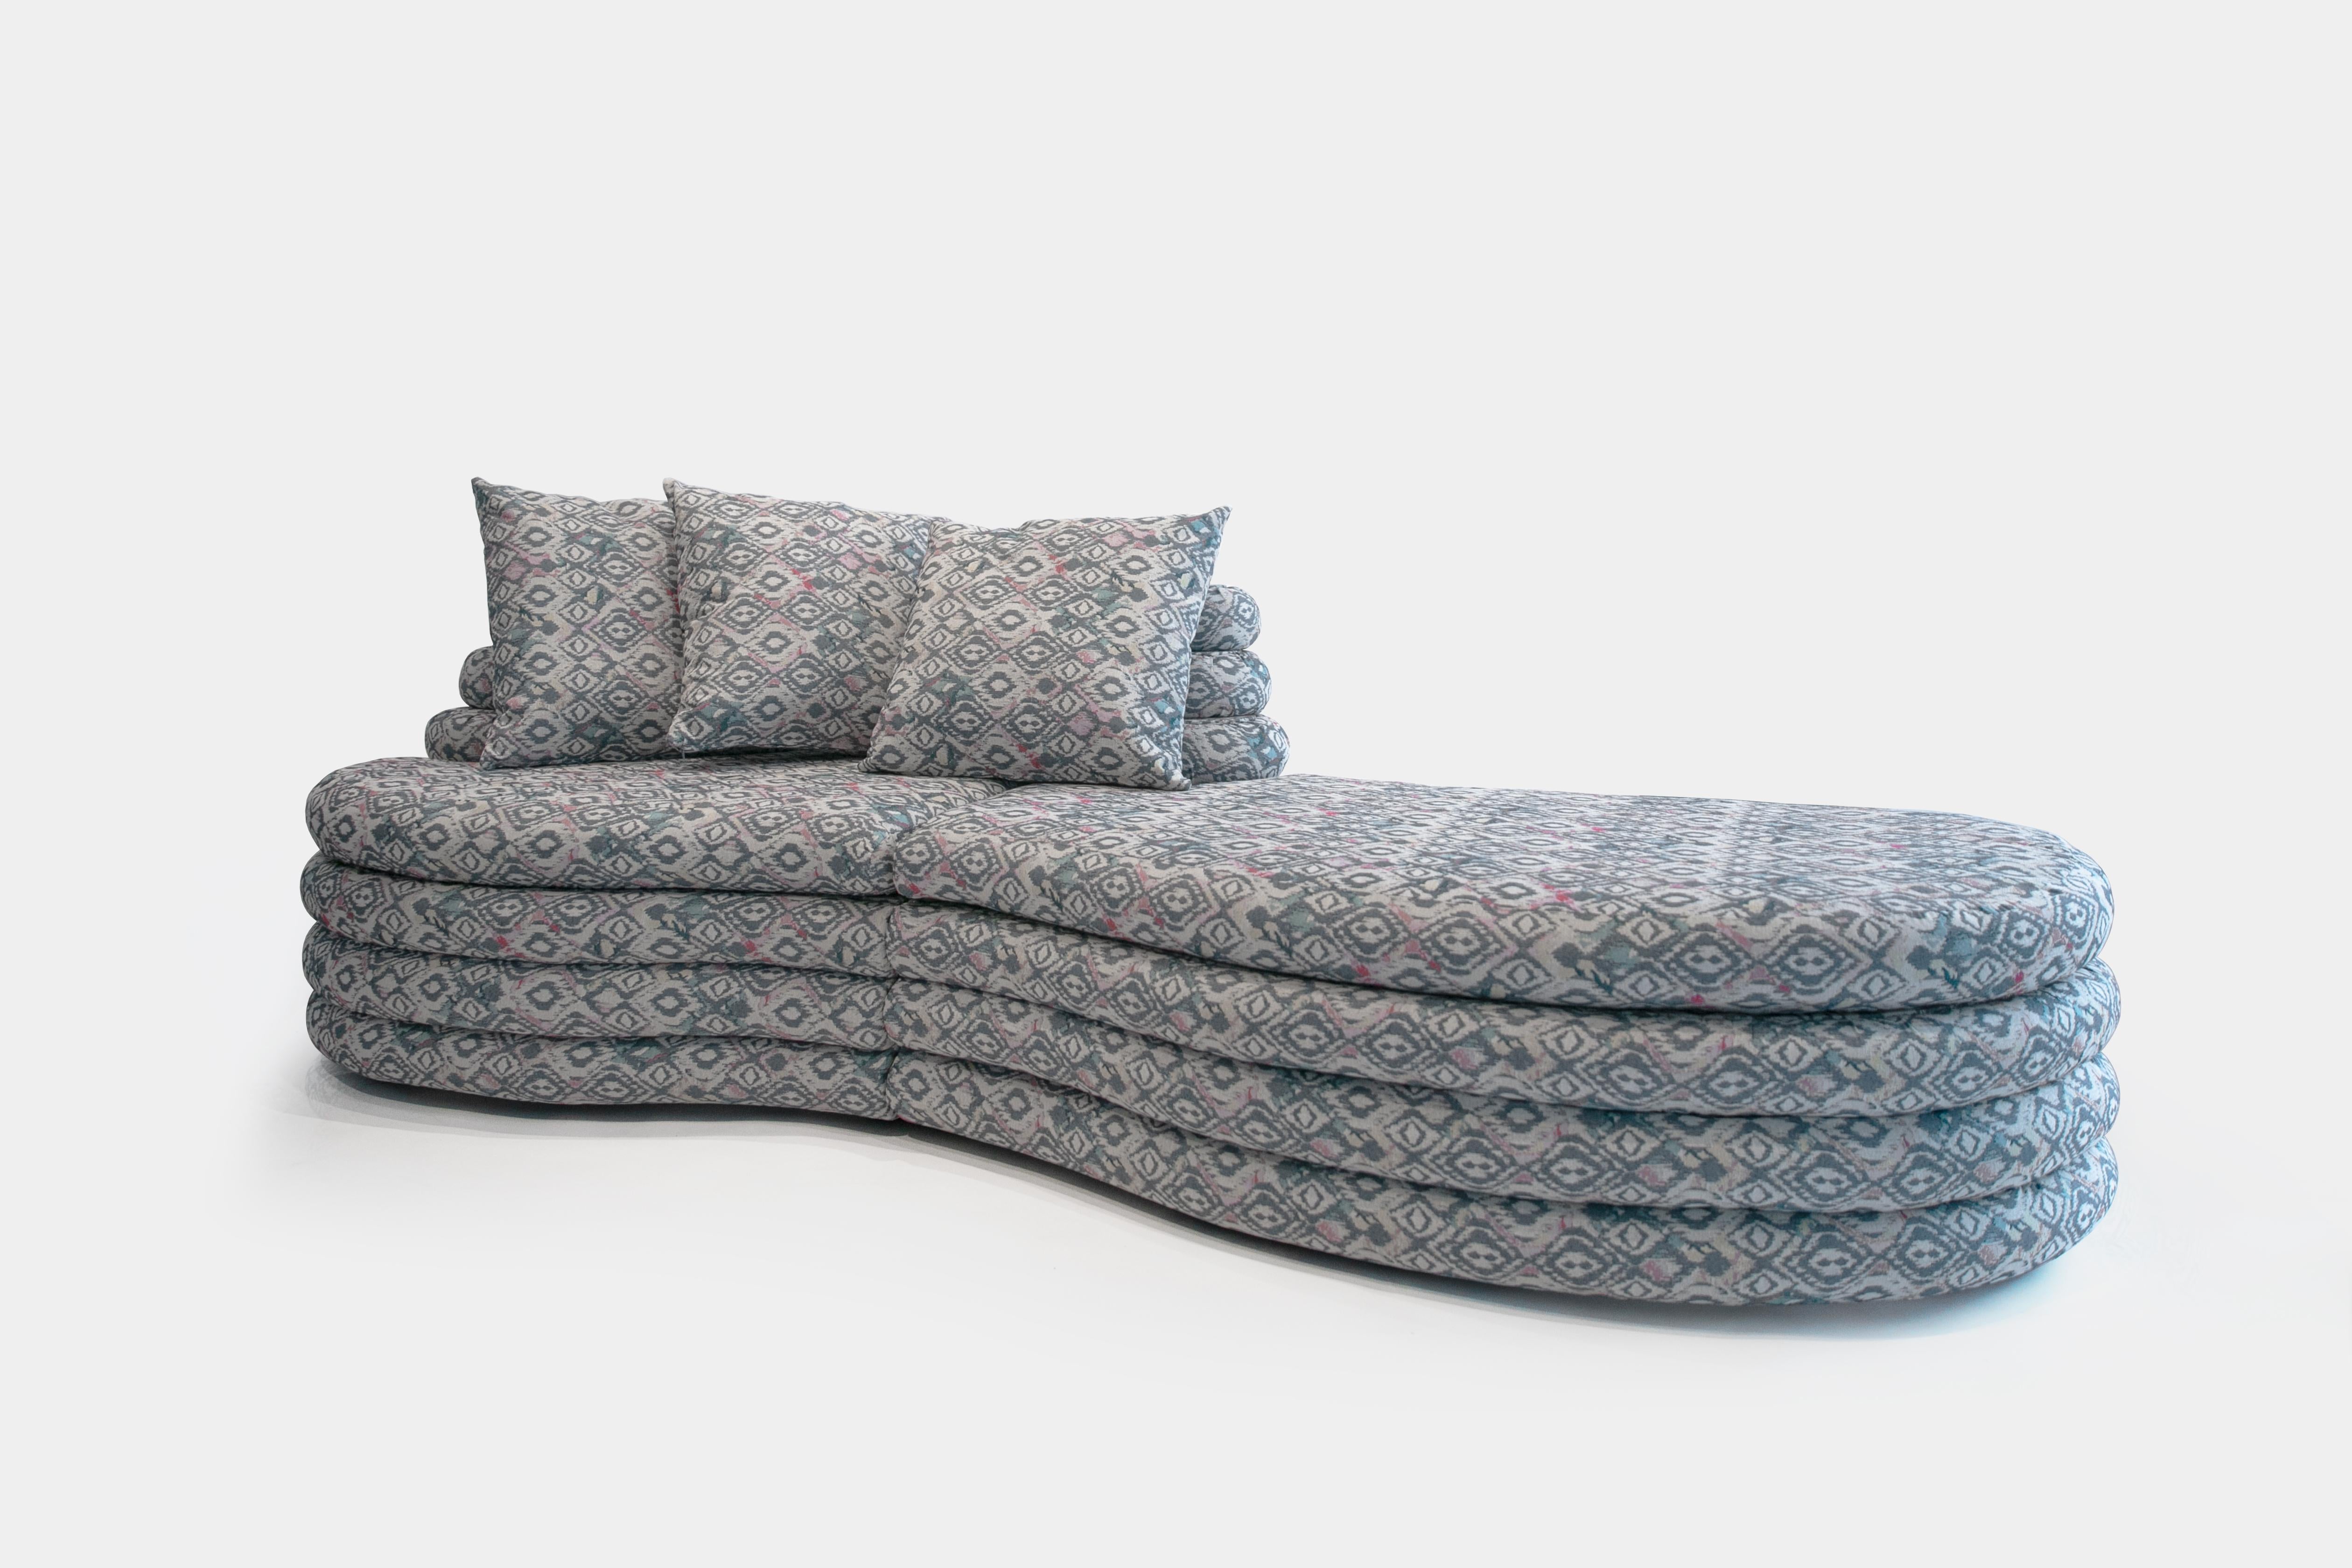 Cypriot Embryo ii Patterned Sofa/ Couch For Sale